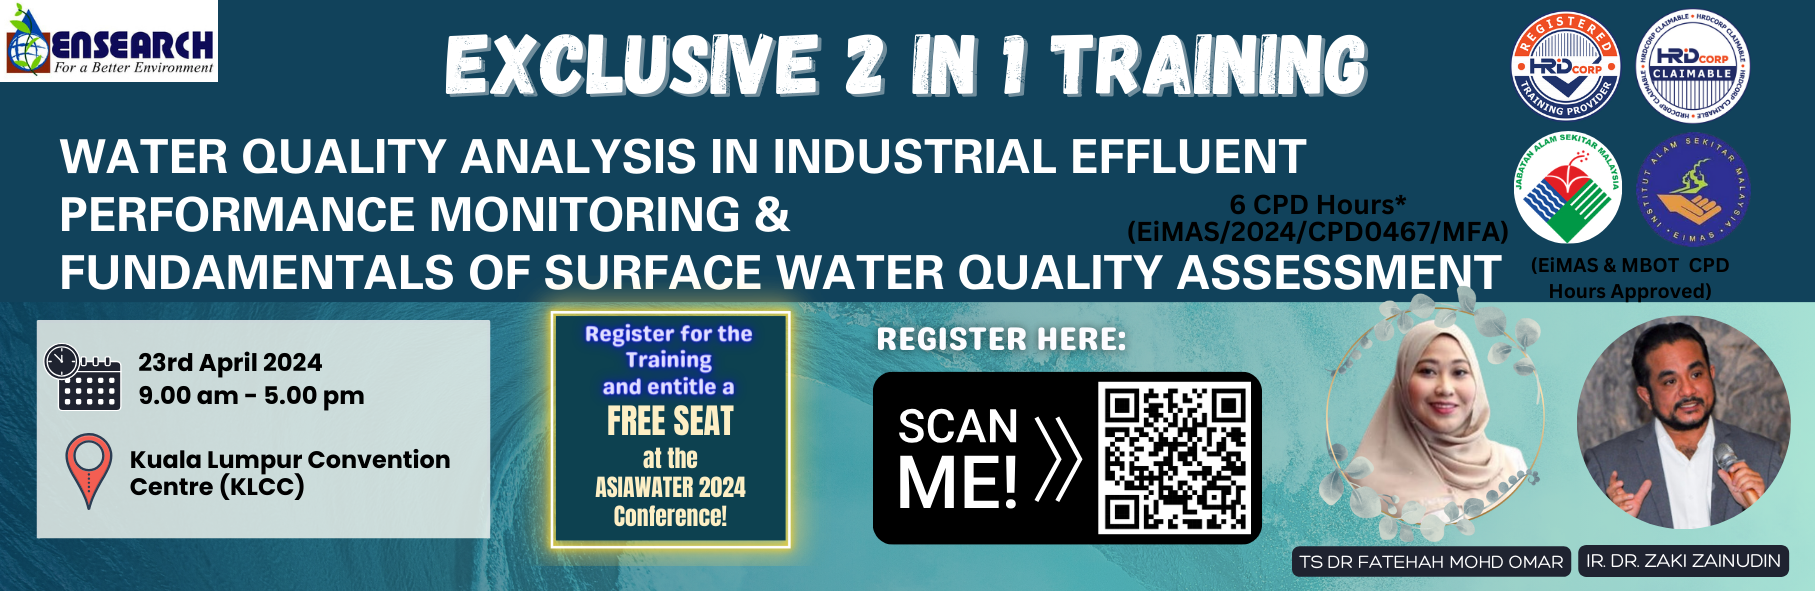 2IN1 TRAINING ASIAWATER 2024 BANNER  (1)